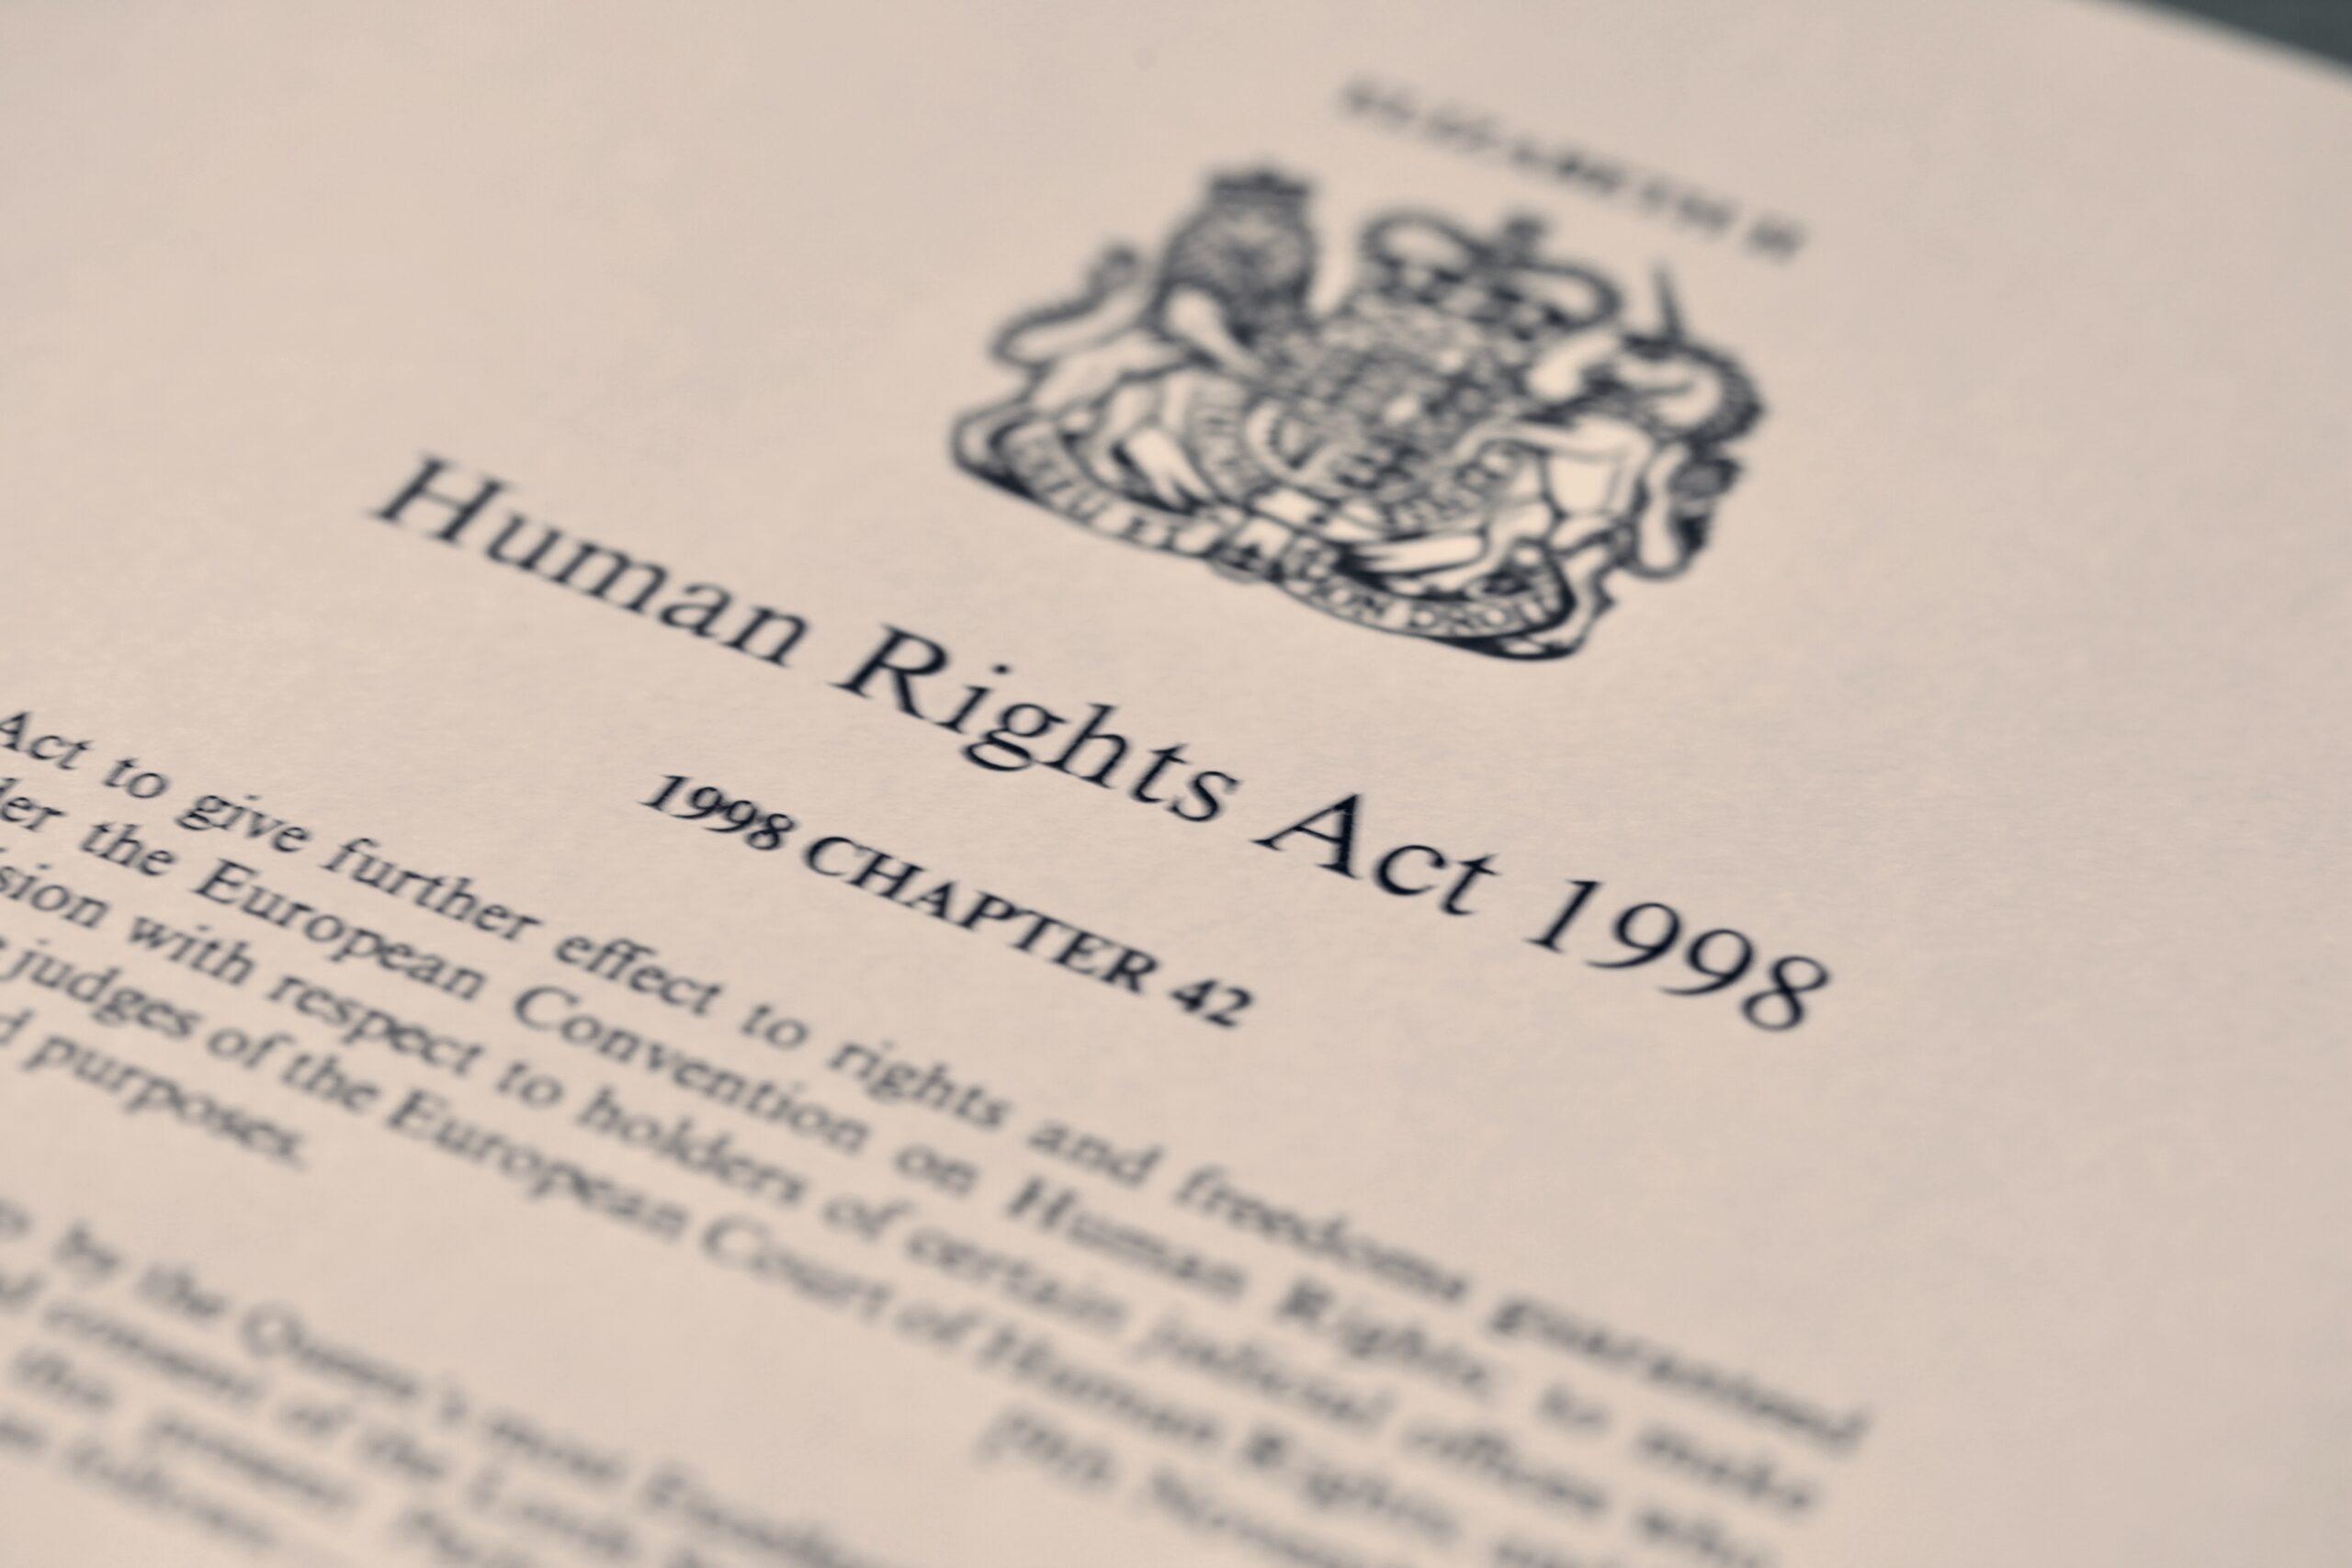 A photograph of the first page of the Human Rights Act (1998) document